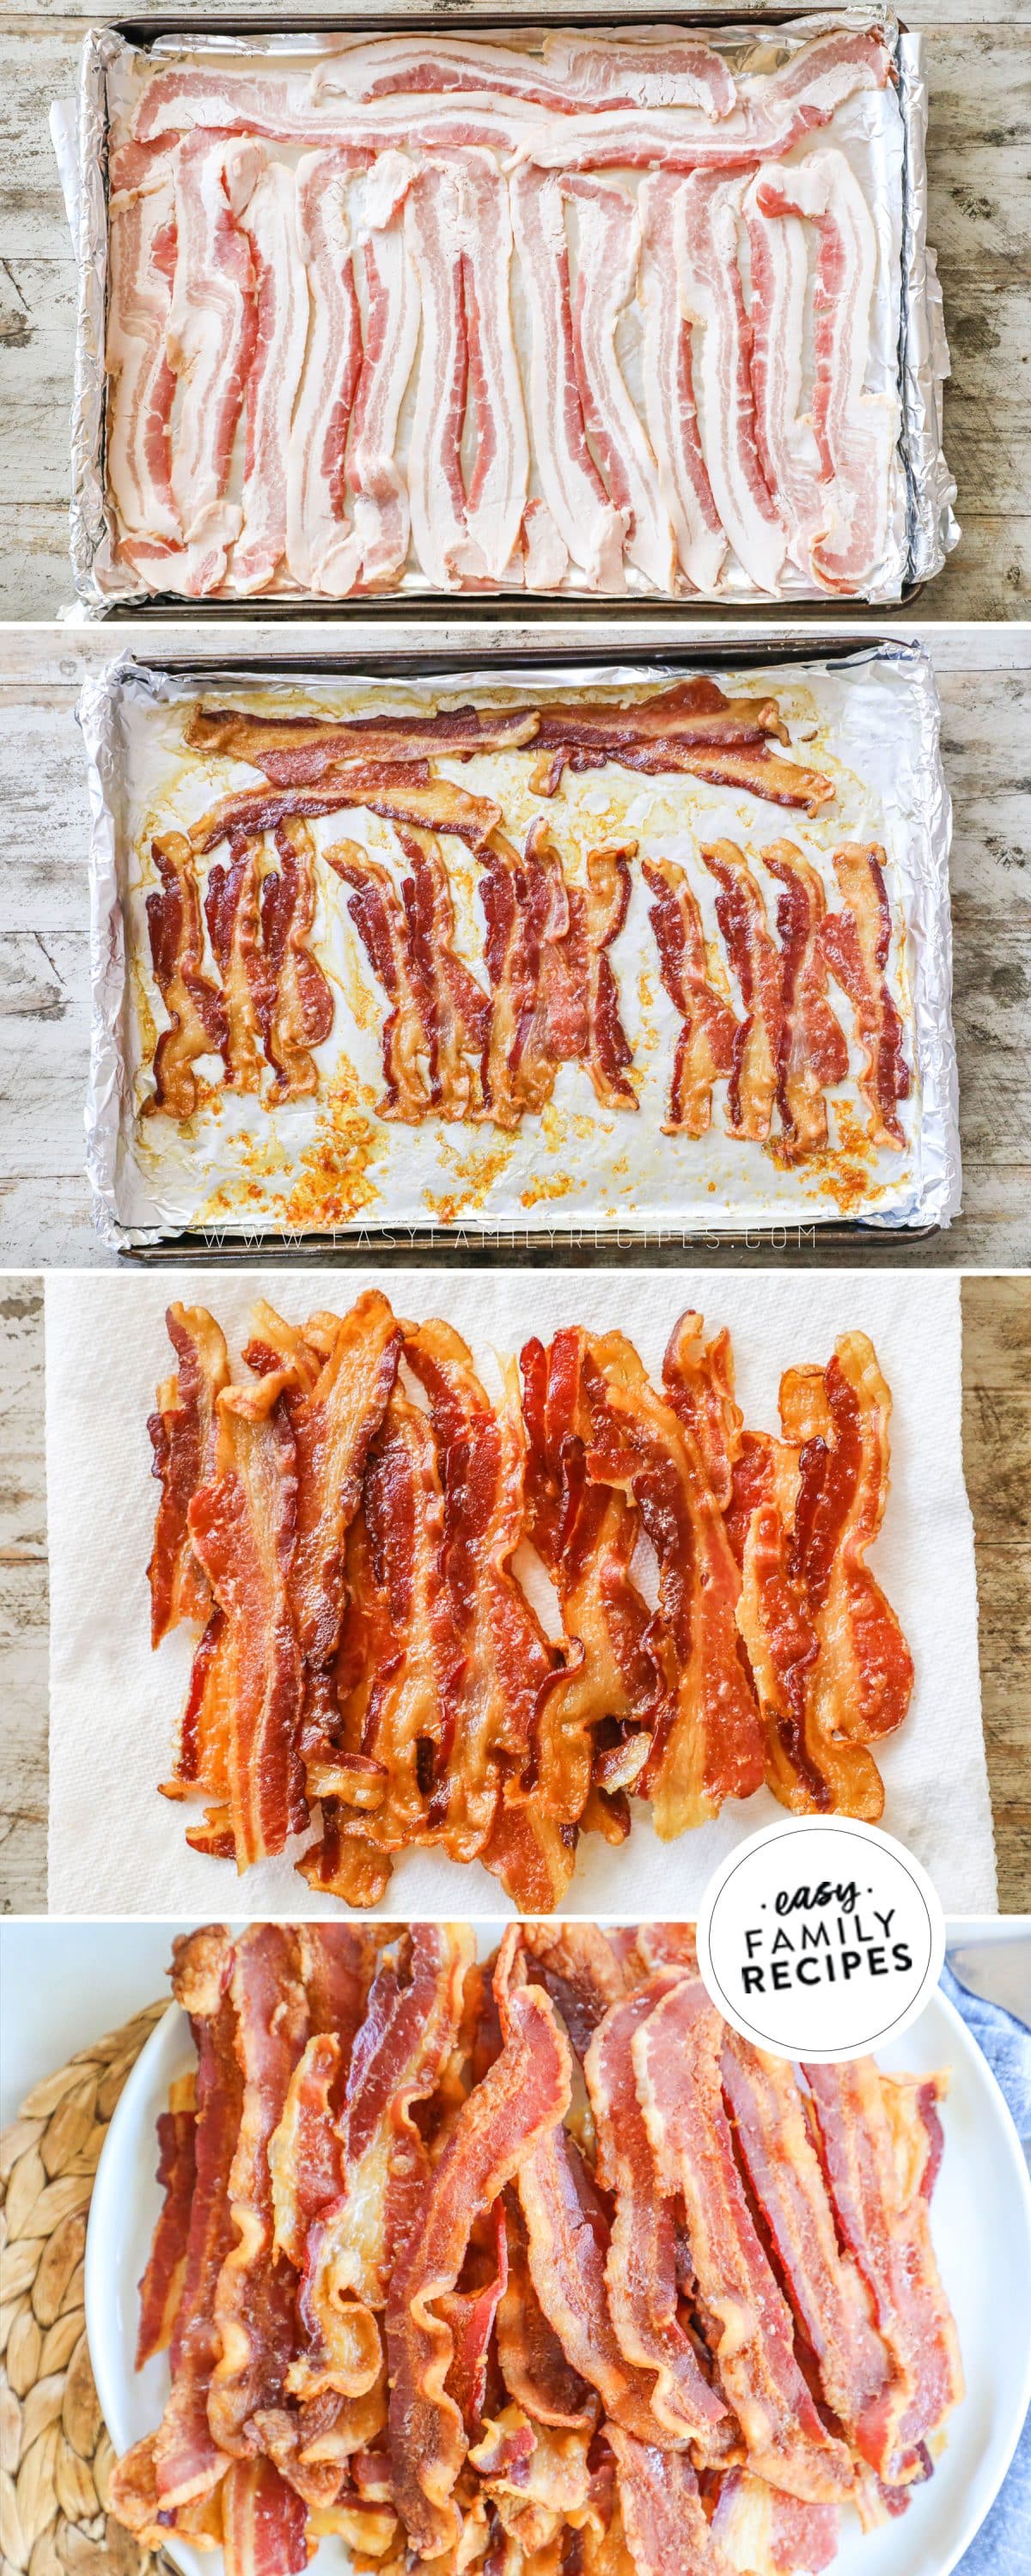 How to Cook Bacon in the Oven - Project Meal Plan